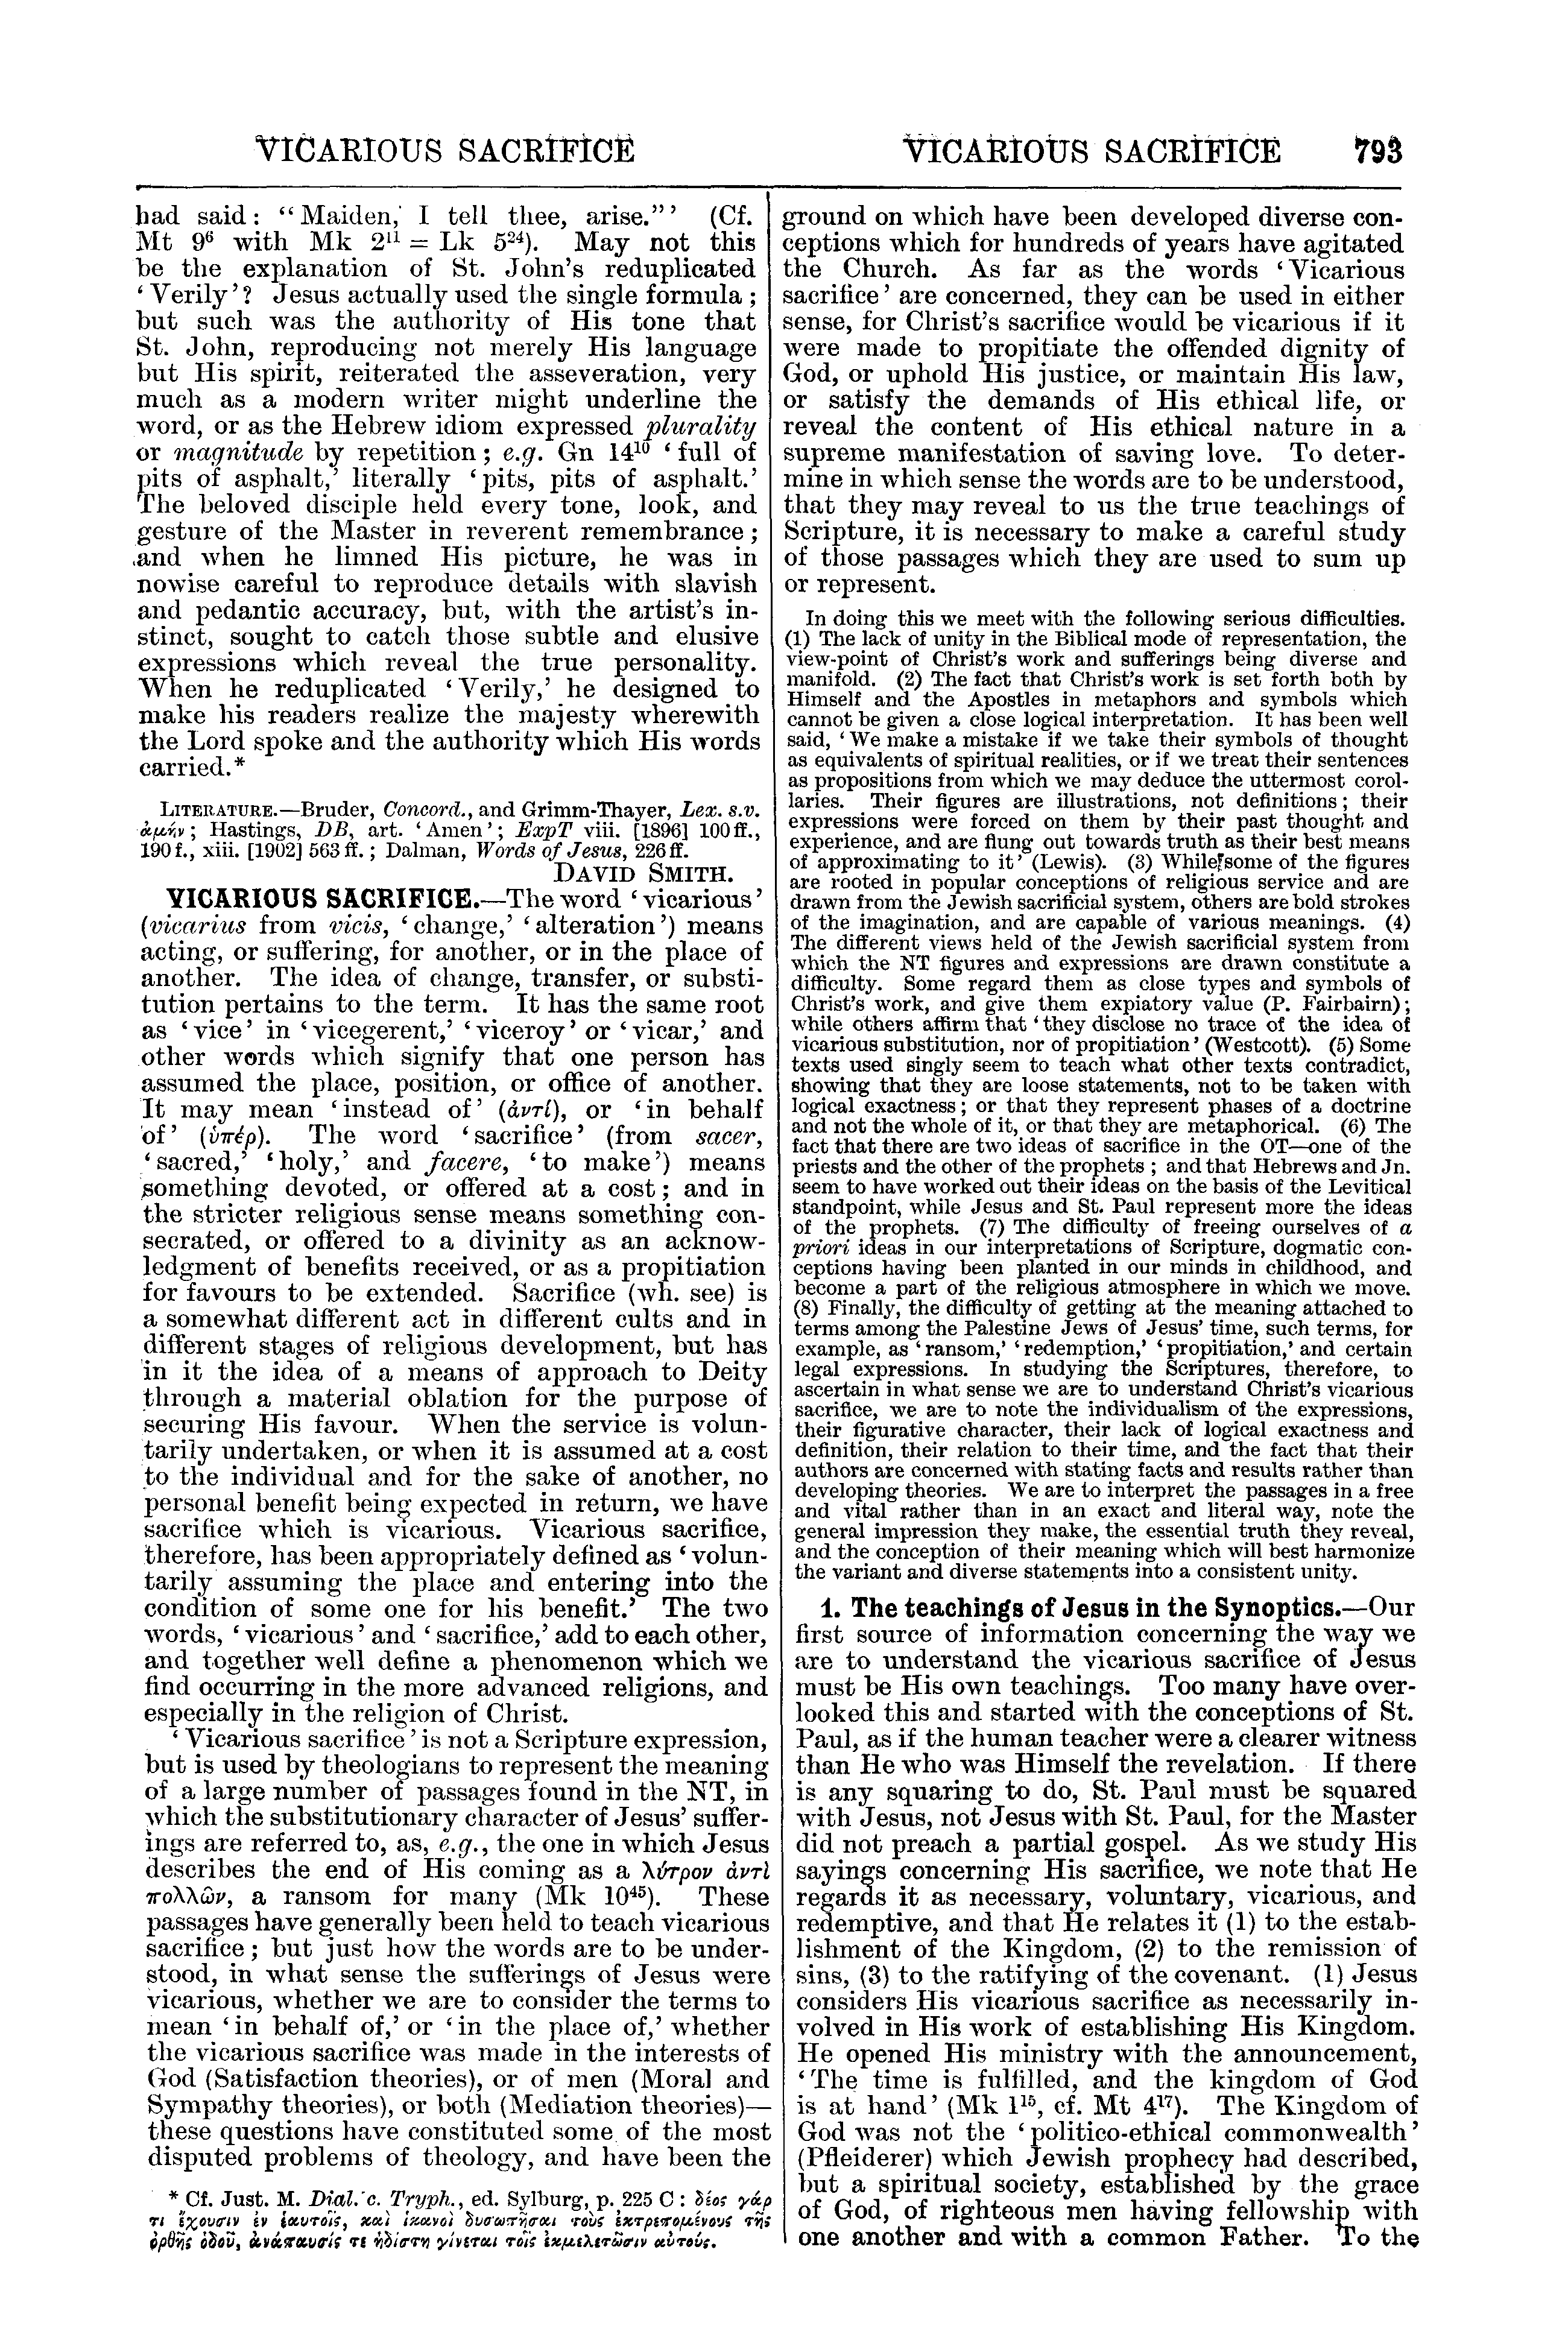 Image of page 793